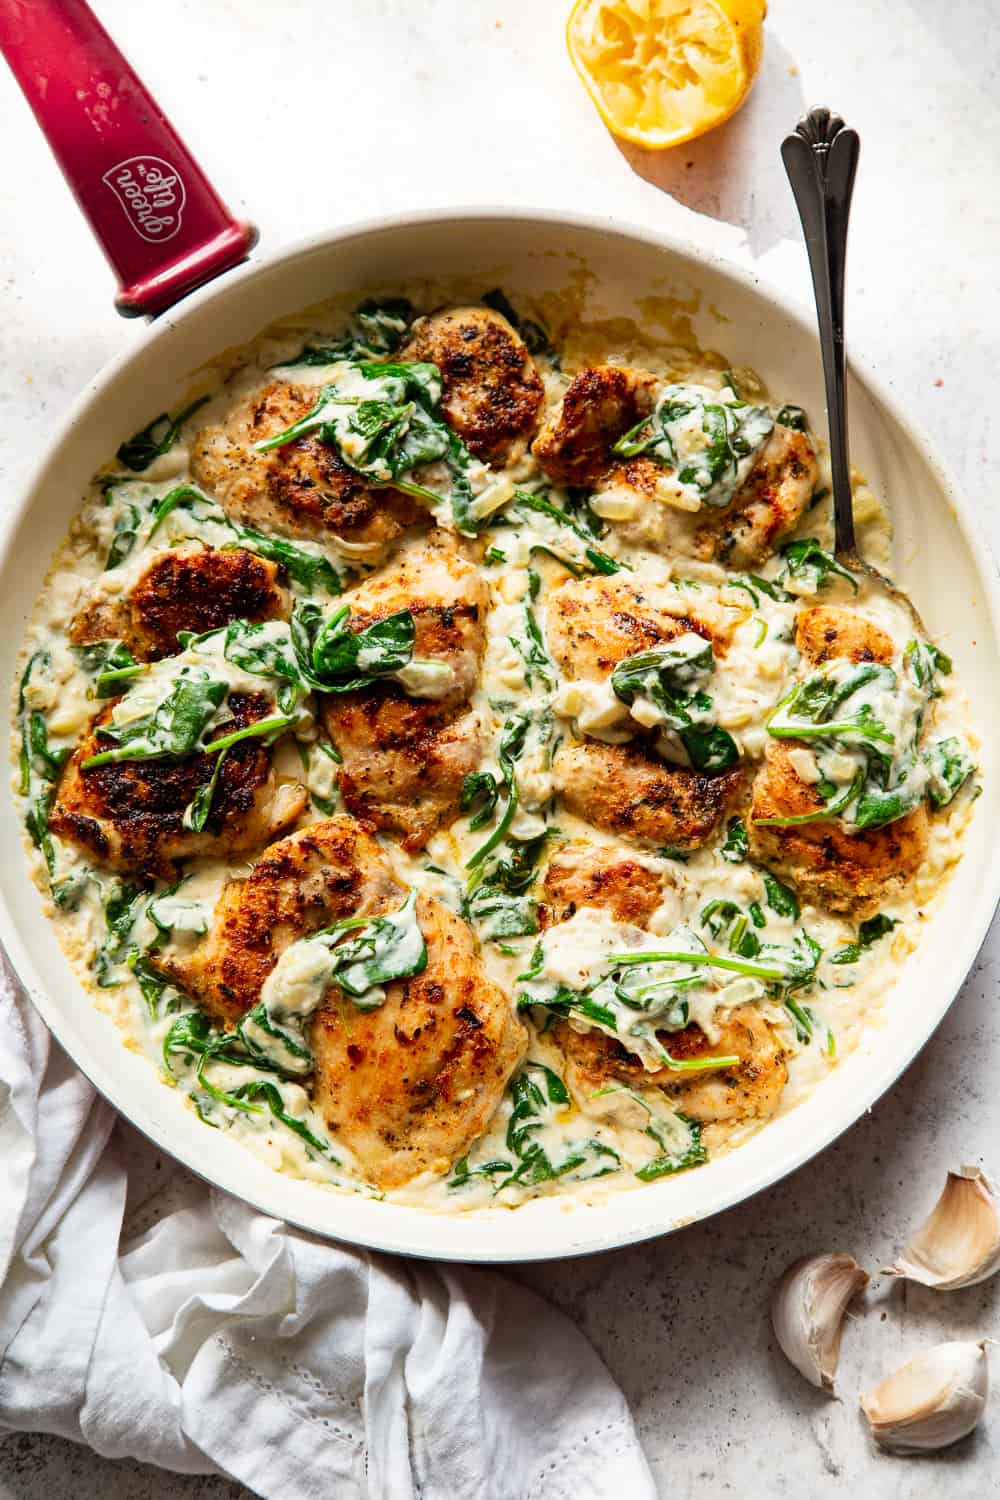 This one pot creamed spinach chicken is paleo, Whole30 friendly and dairy free but you’d never guess! Juicy seasoned chicken is cooked in one skillet with a creamy, “cheesy” sauce and spinach that’s easy and great for weeknights! The leftovers are perfect for lunch the next day too. #paleo #whole30 #keto #cleaneating 